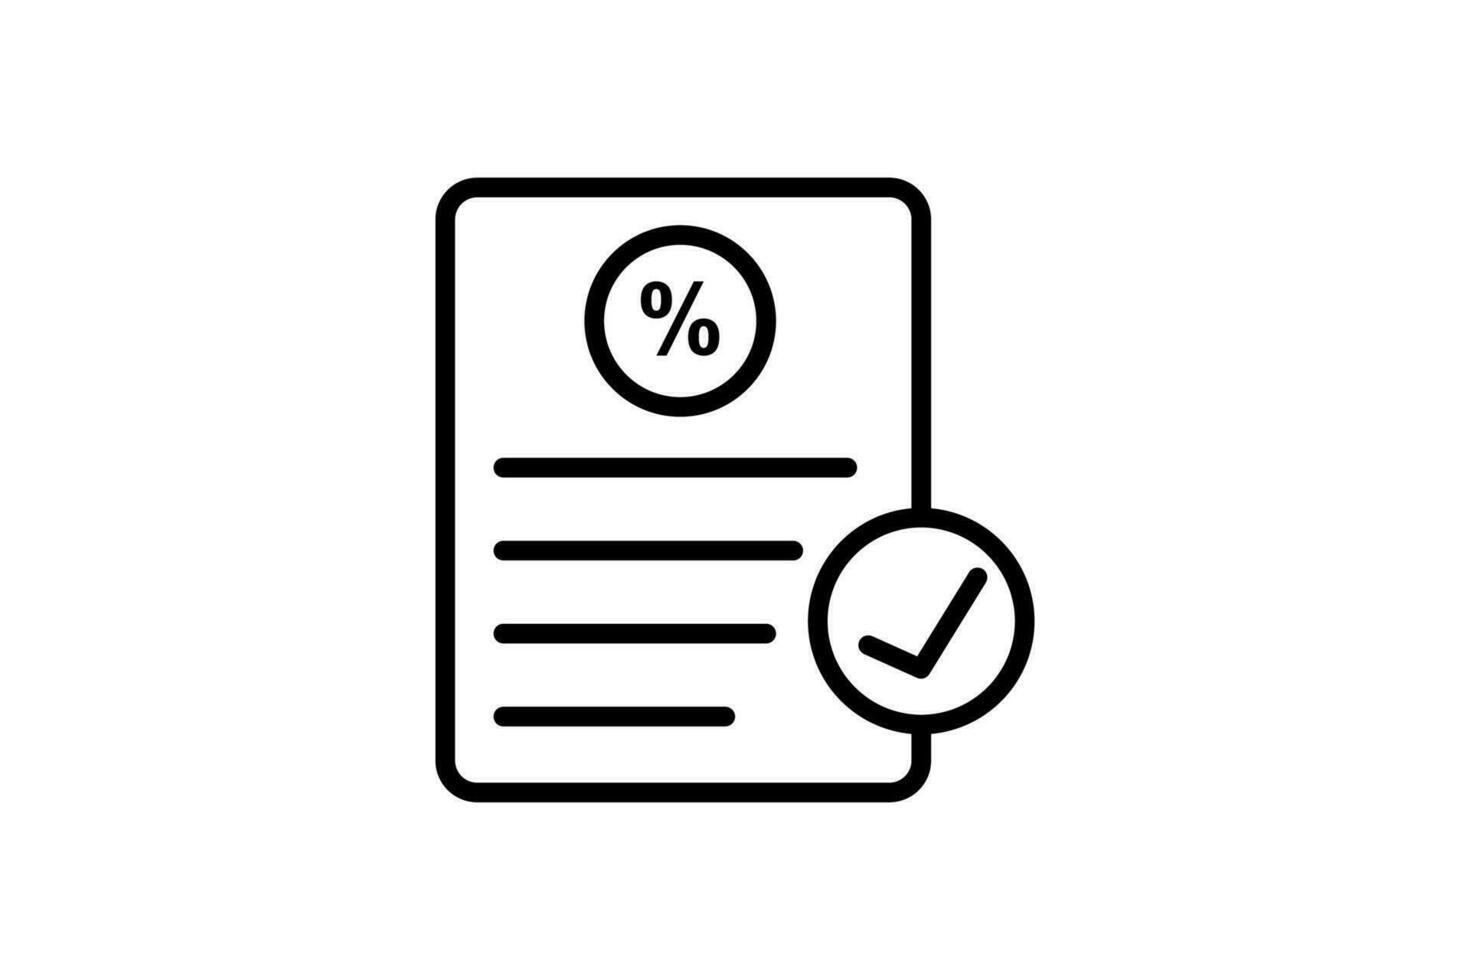 Loan Approval  Icon. Icon related to Credit and Loan. suitable for web site design, app, user interfaces, printable etc. Line icon style. Simple vector design editable